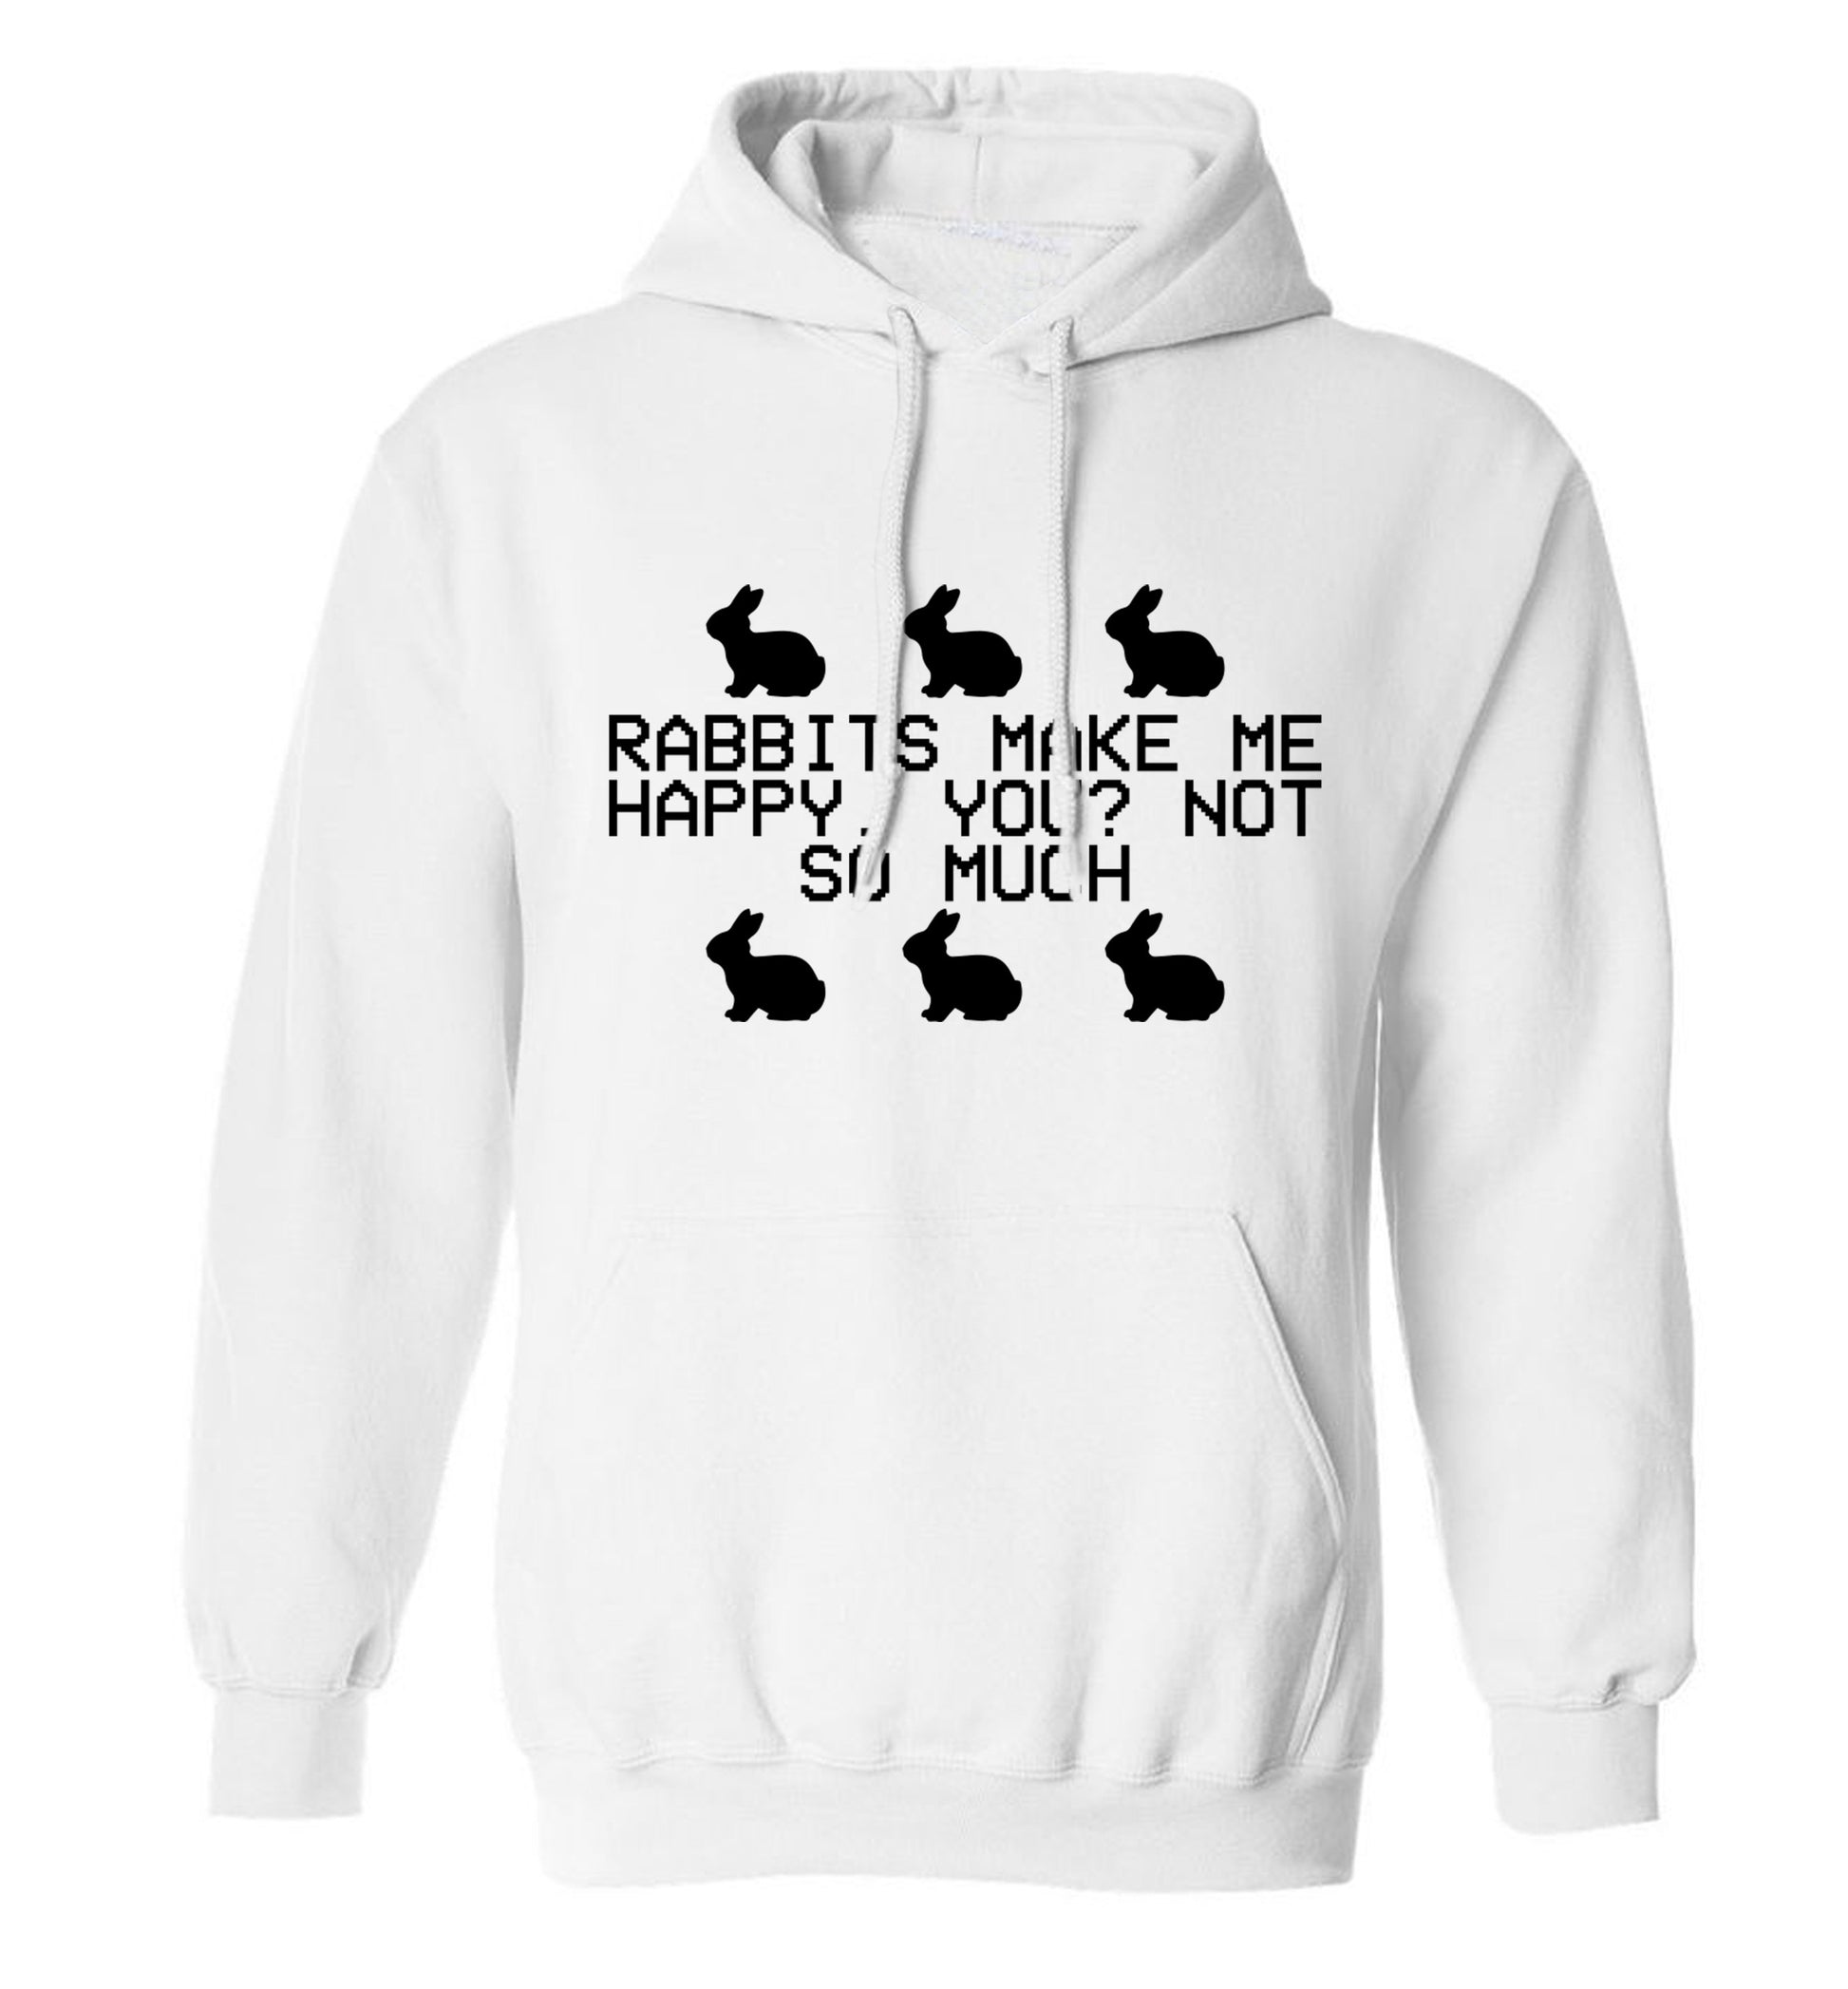 Rabbits make me happy, you not so much adults unisex white hoodie 2XL